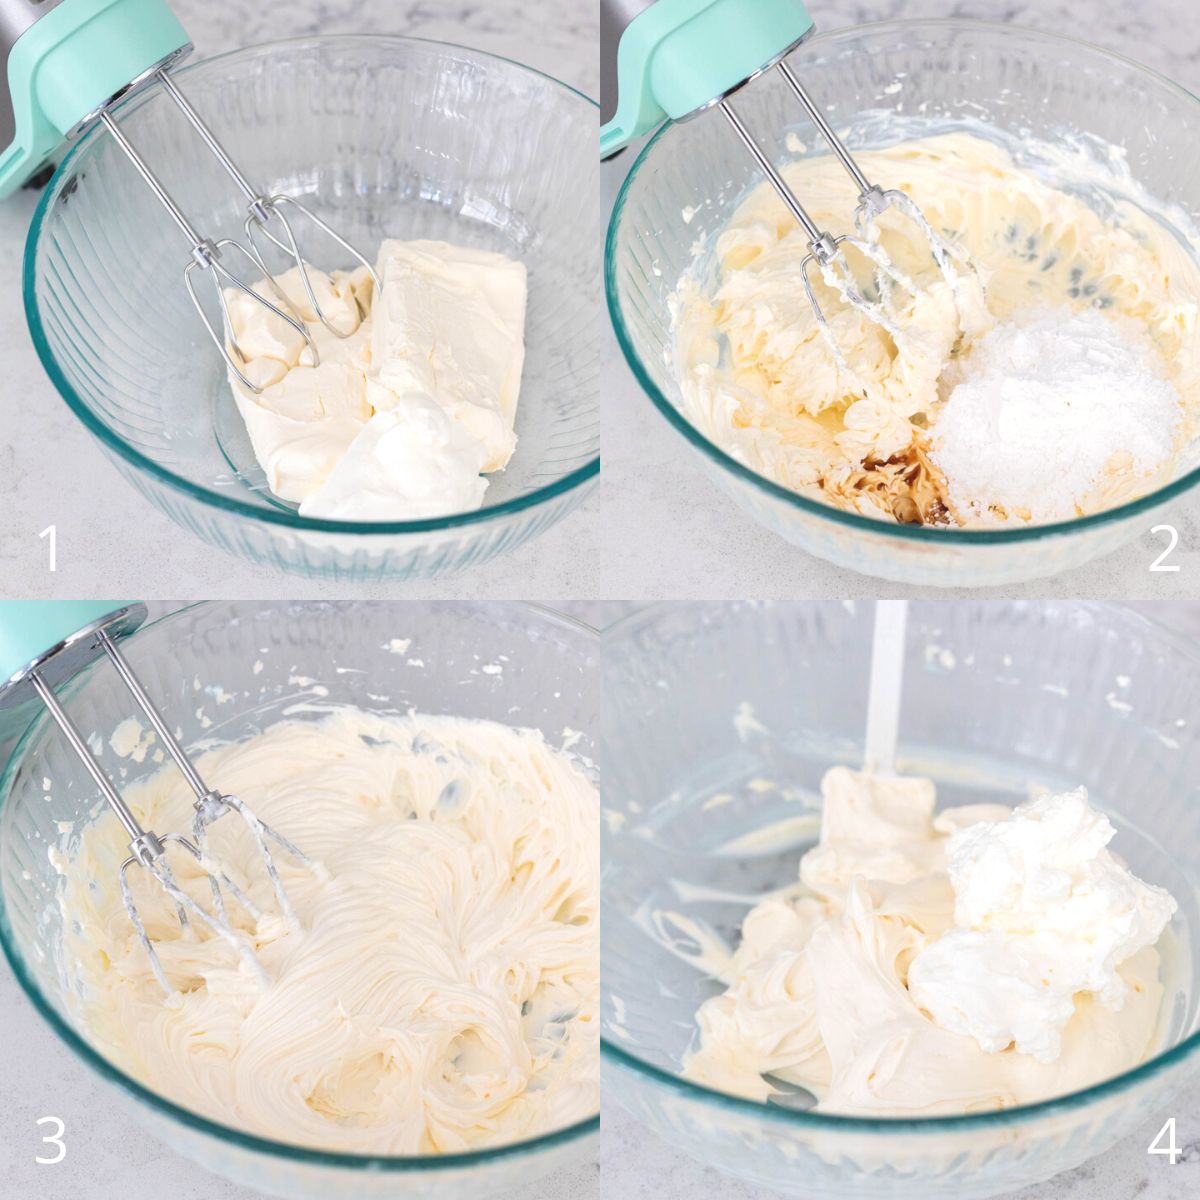 The photo collage shows step by step photos that illustrate how to beat the cream cheese with sugar and vanilla and fold in the whipped cream. 